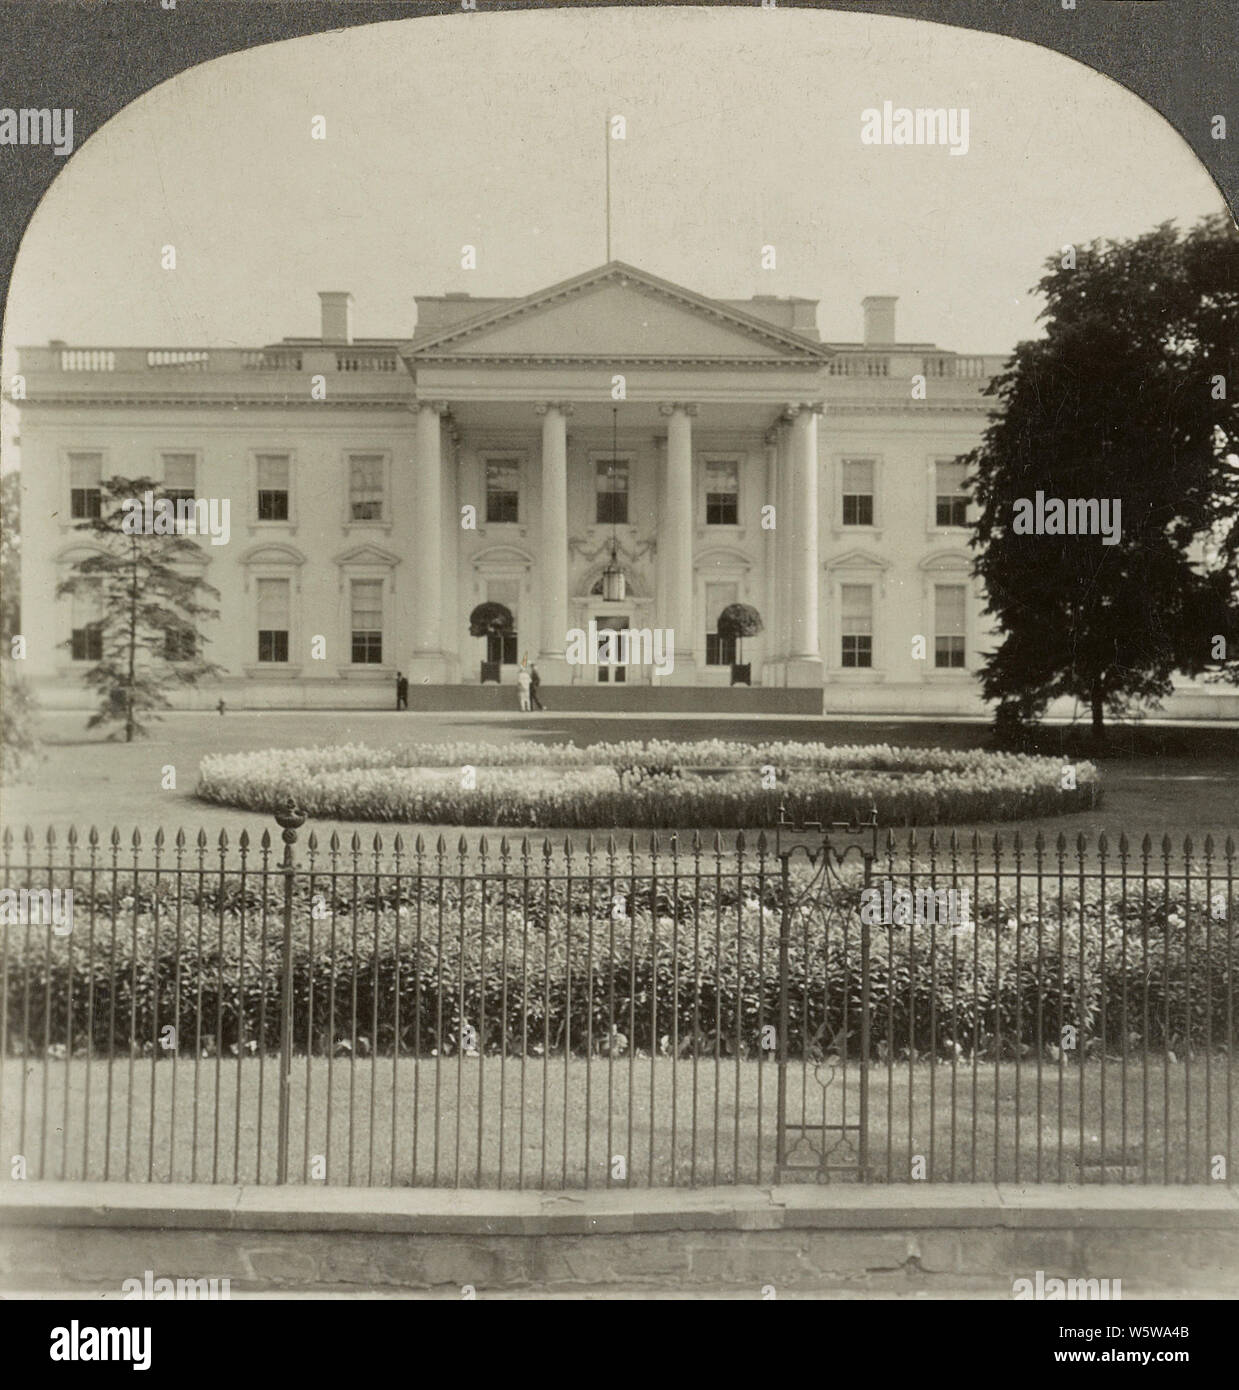 White House (north front), the historic official home of the President, Washington, D.C. in 1928. The White House is the official residence and workplace of the president of the United States. It is located at 1600 Pennsylvania Avenue NW in Washington, D.C. and has been the residence of every U.S. president since John Adams in 1800. Stock Photo